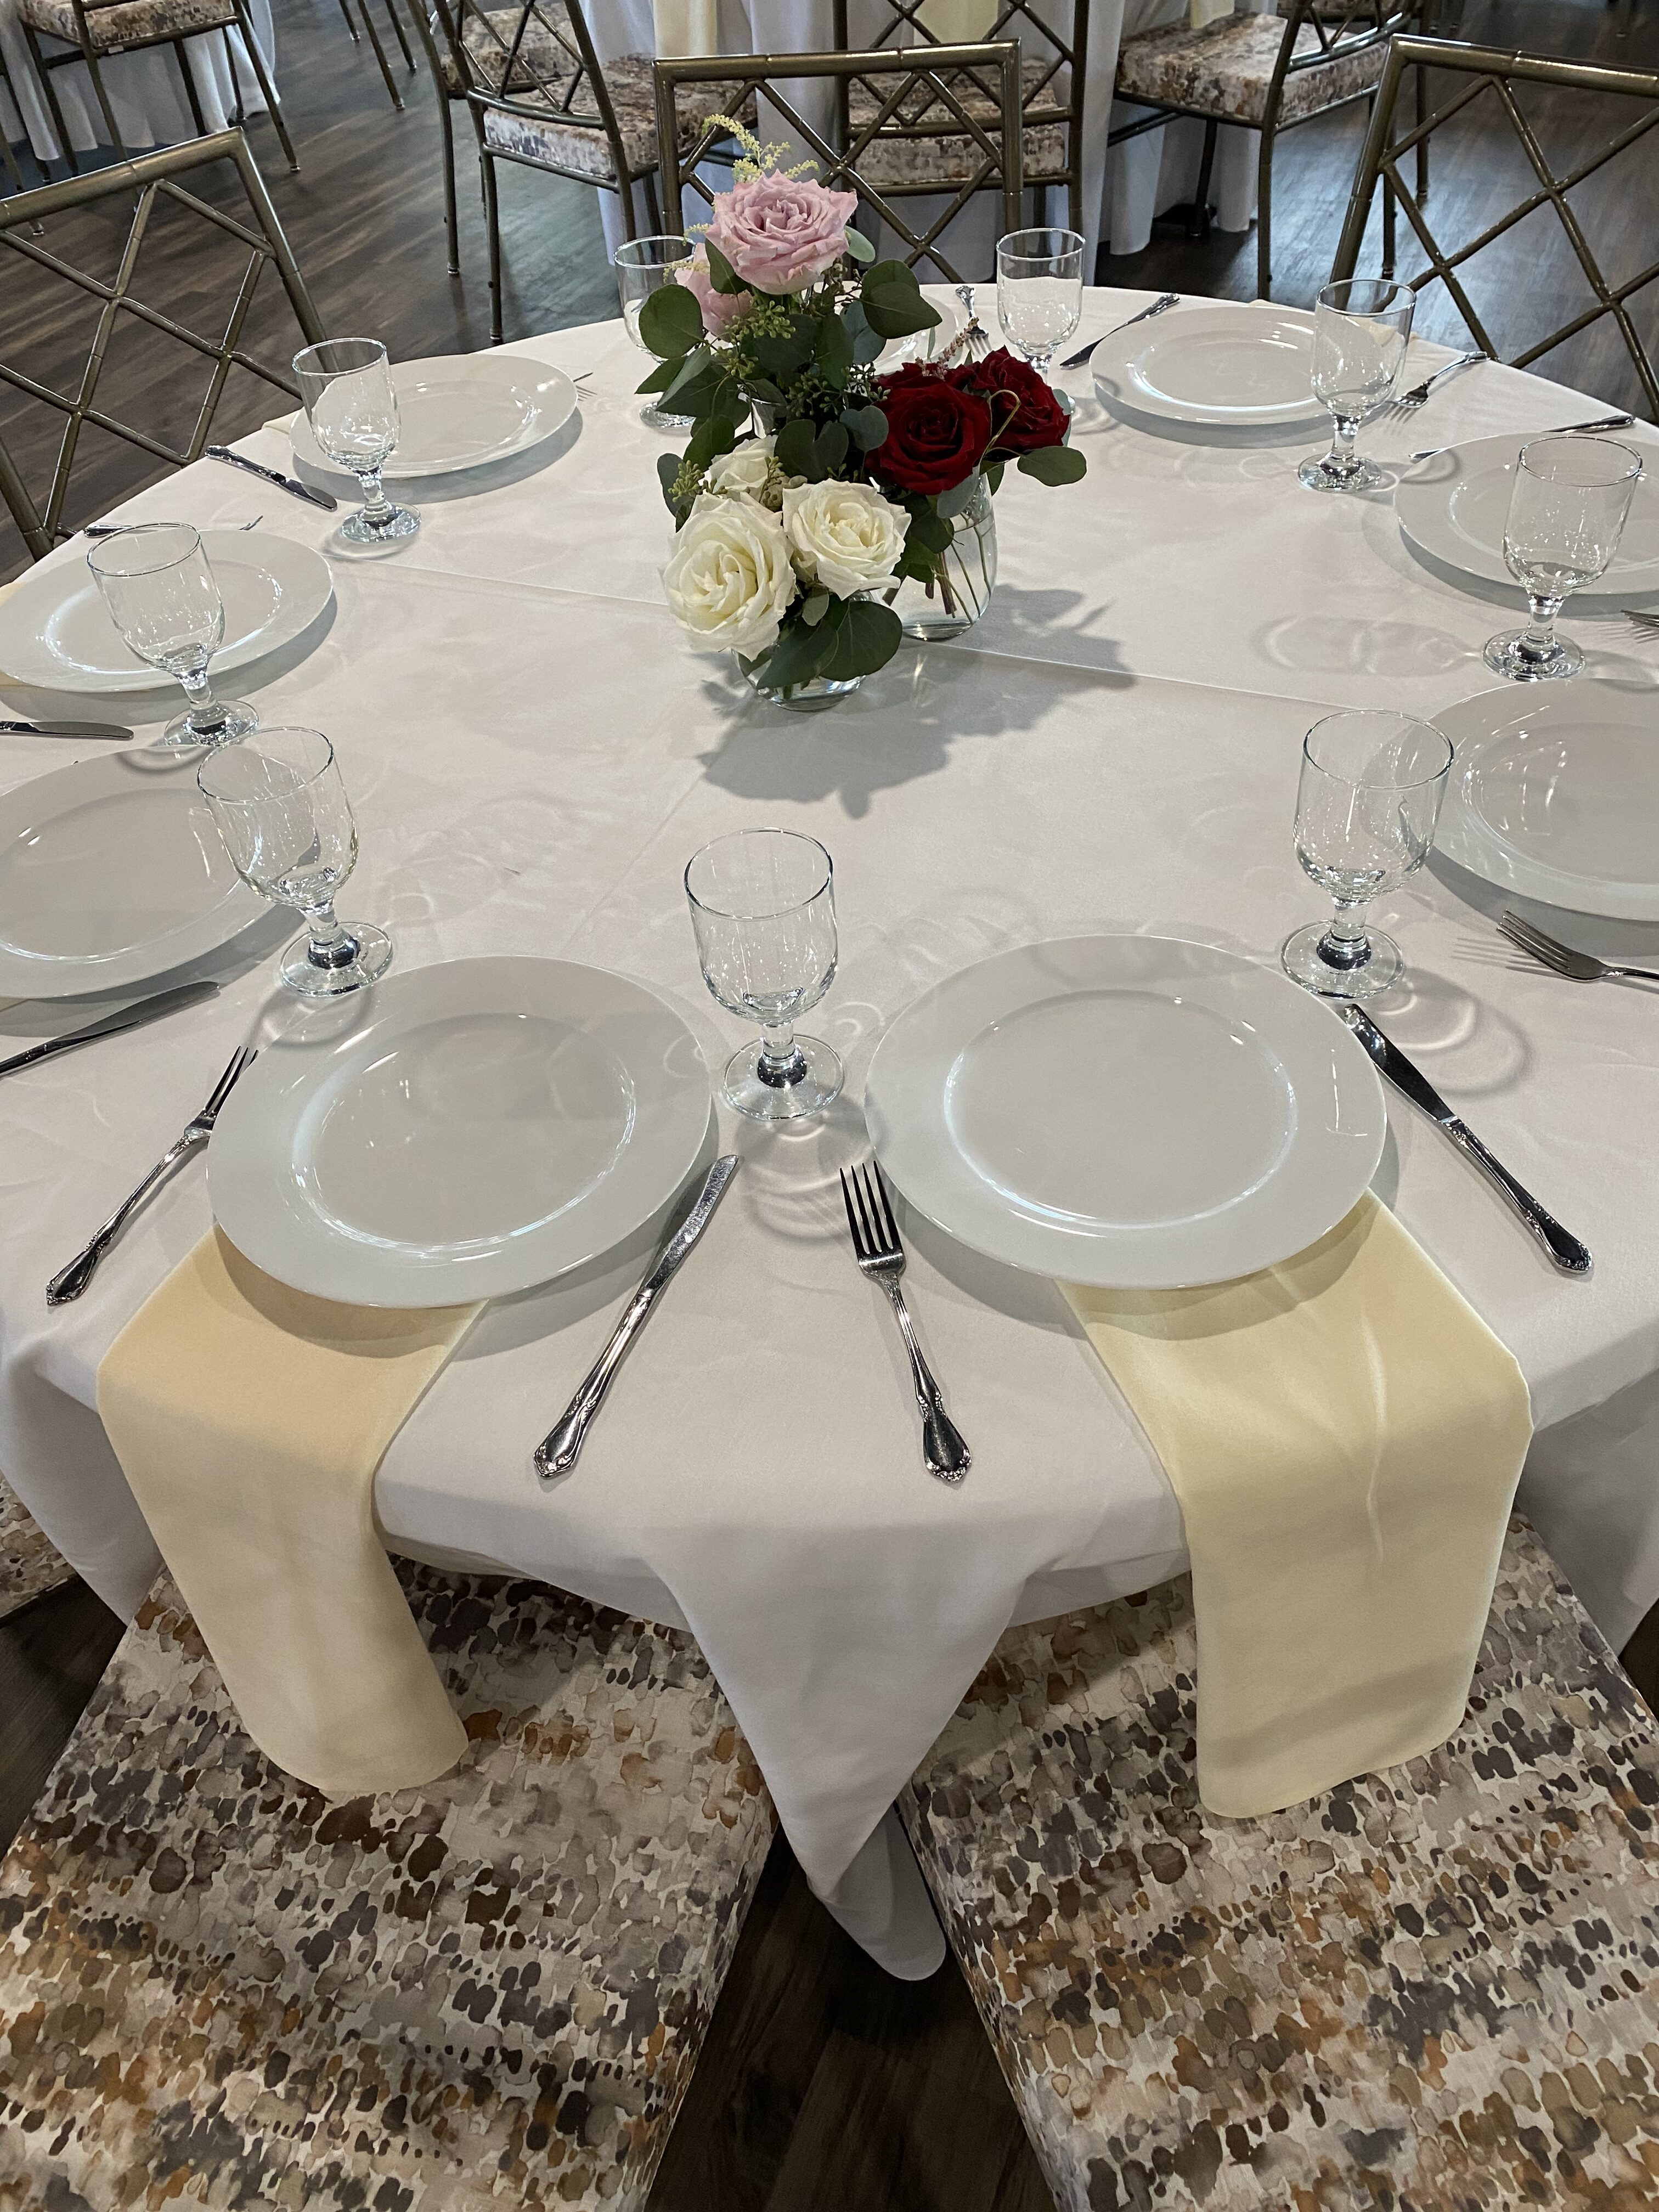 White table cloth on a circular table with a floral centerpiece